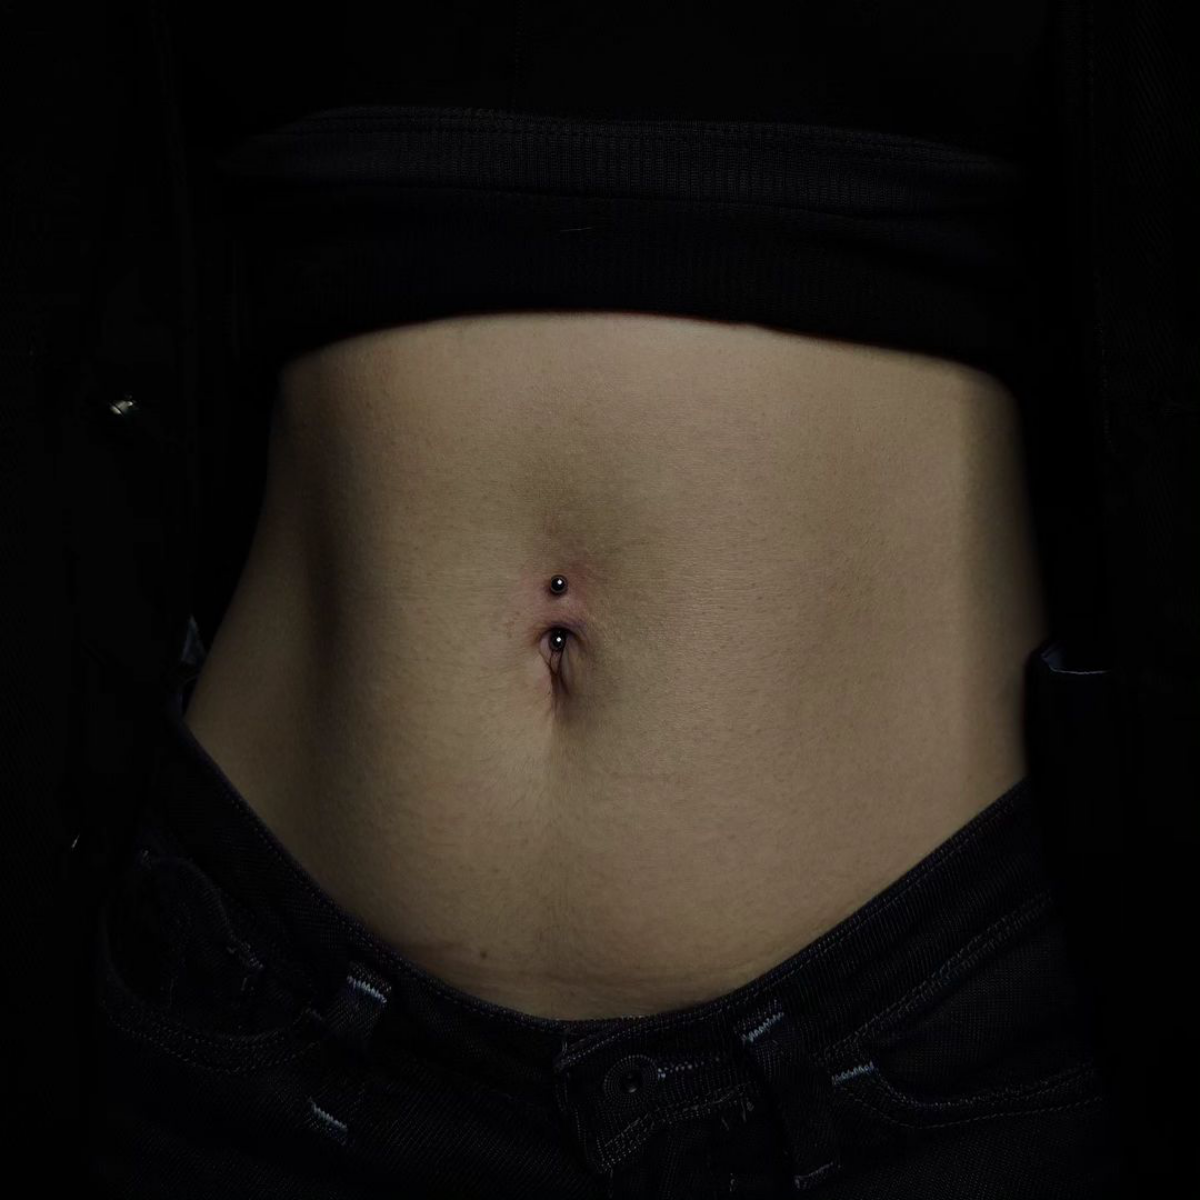 1 belly button piercings person with belly piercing